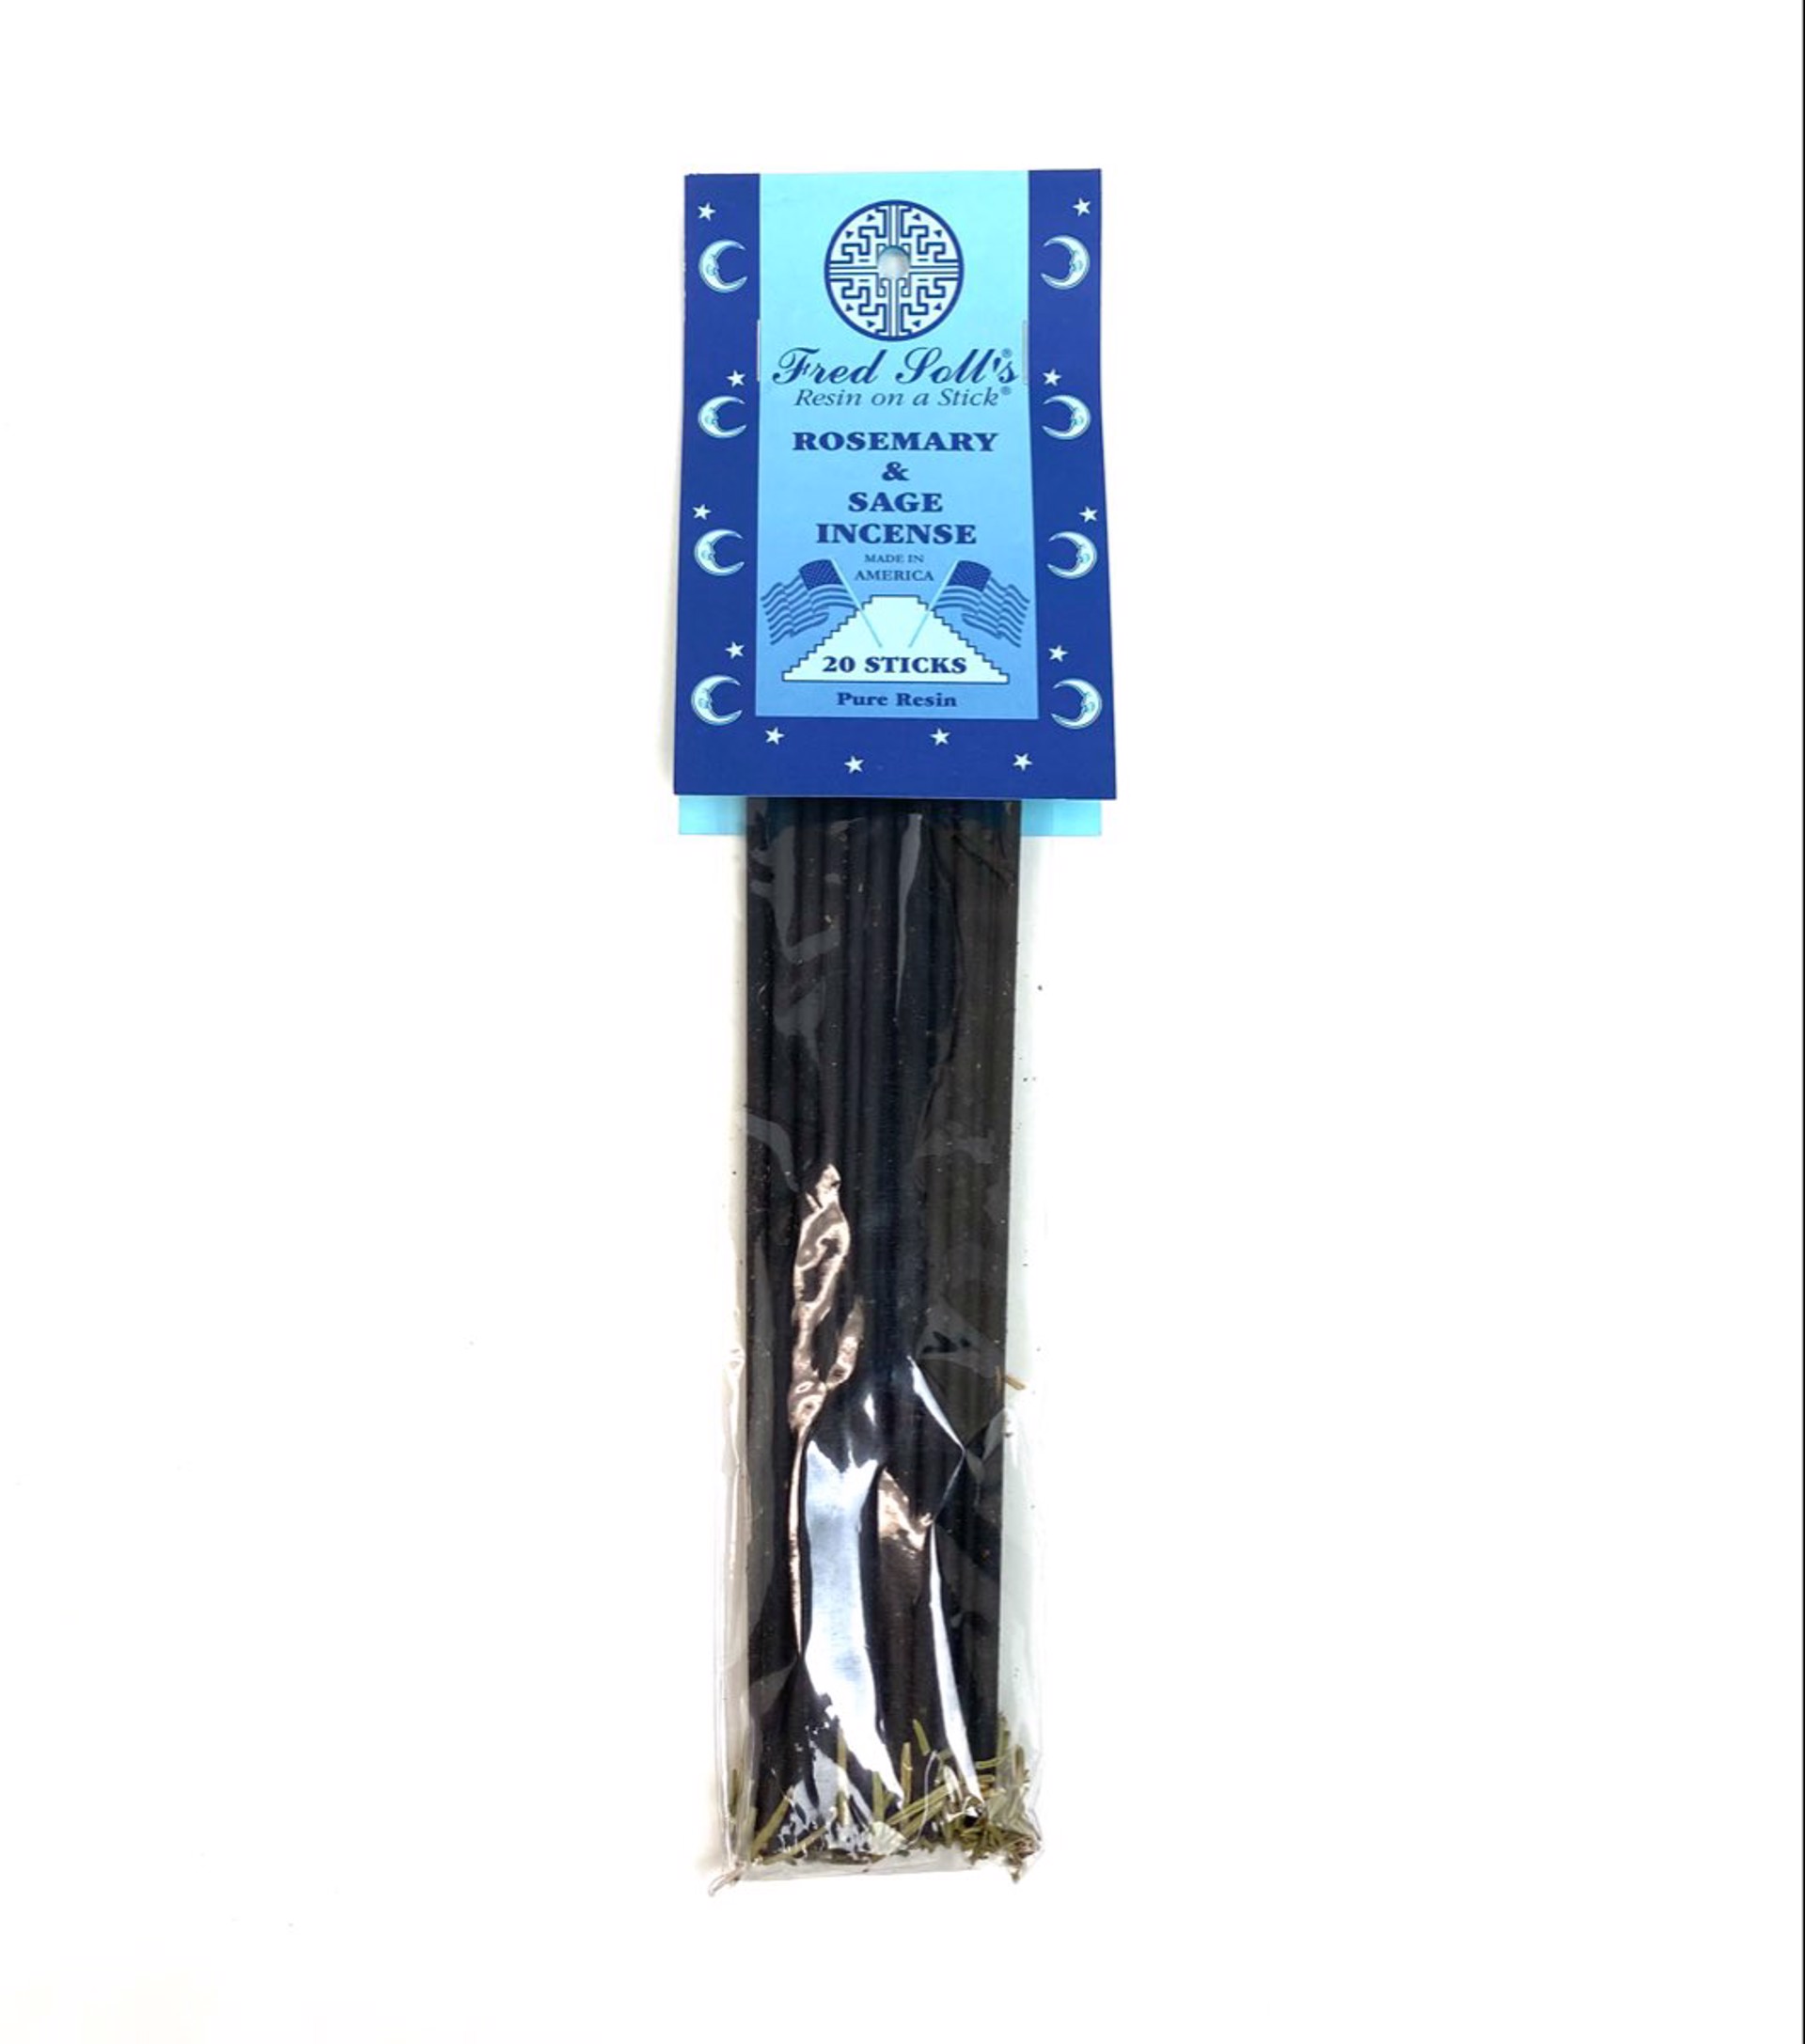 Rosemary and Sage Incense by Fred Soll Incense